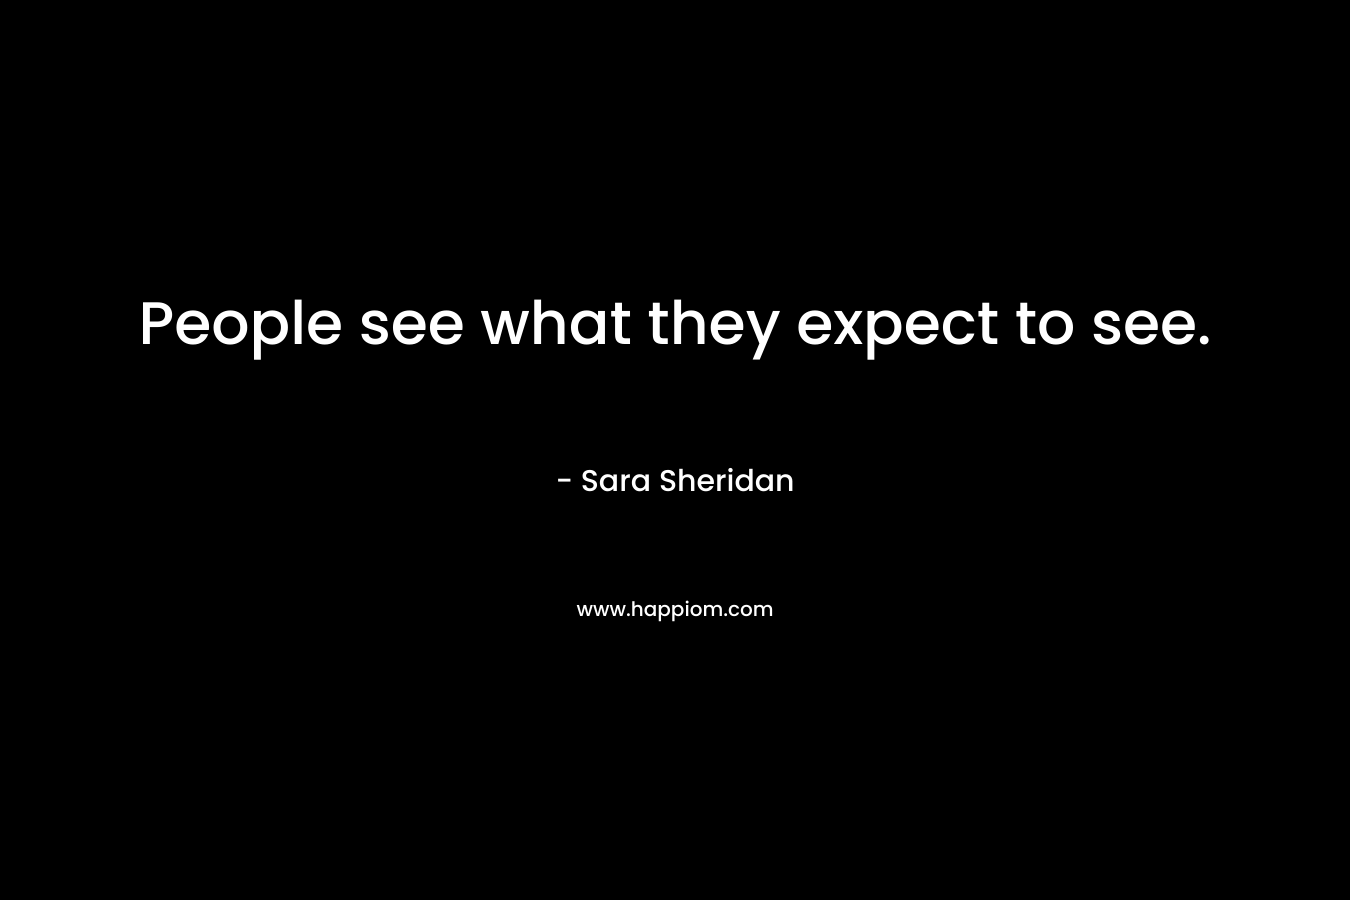 People see what they expect to see. – Sara Sheridan